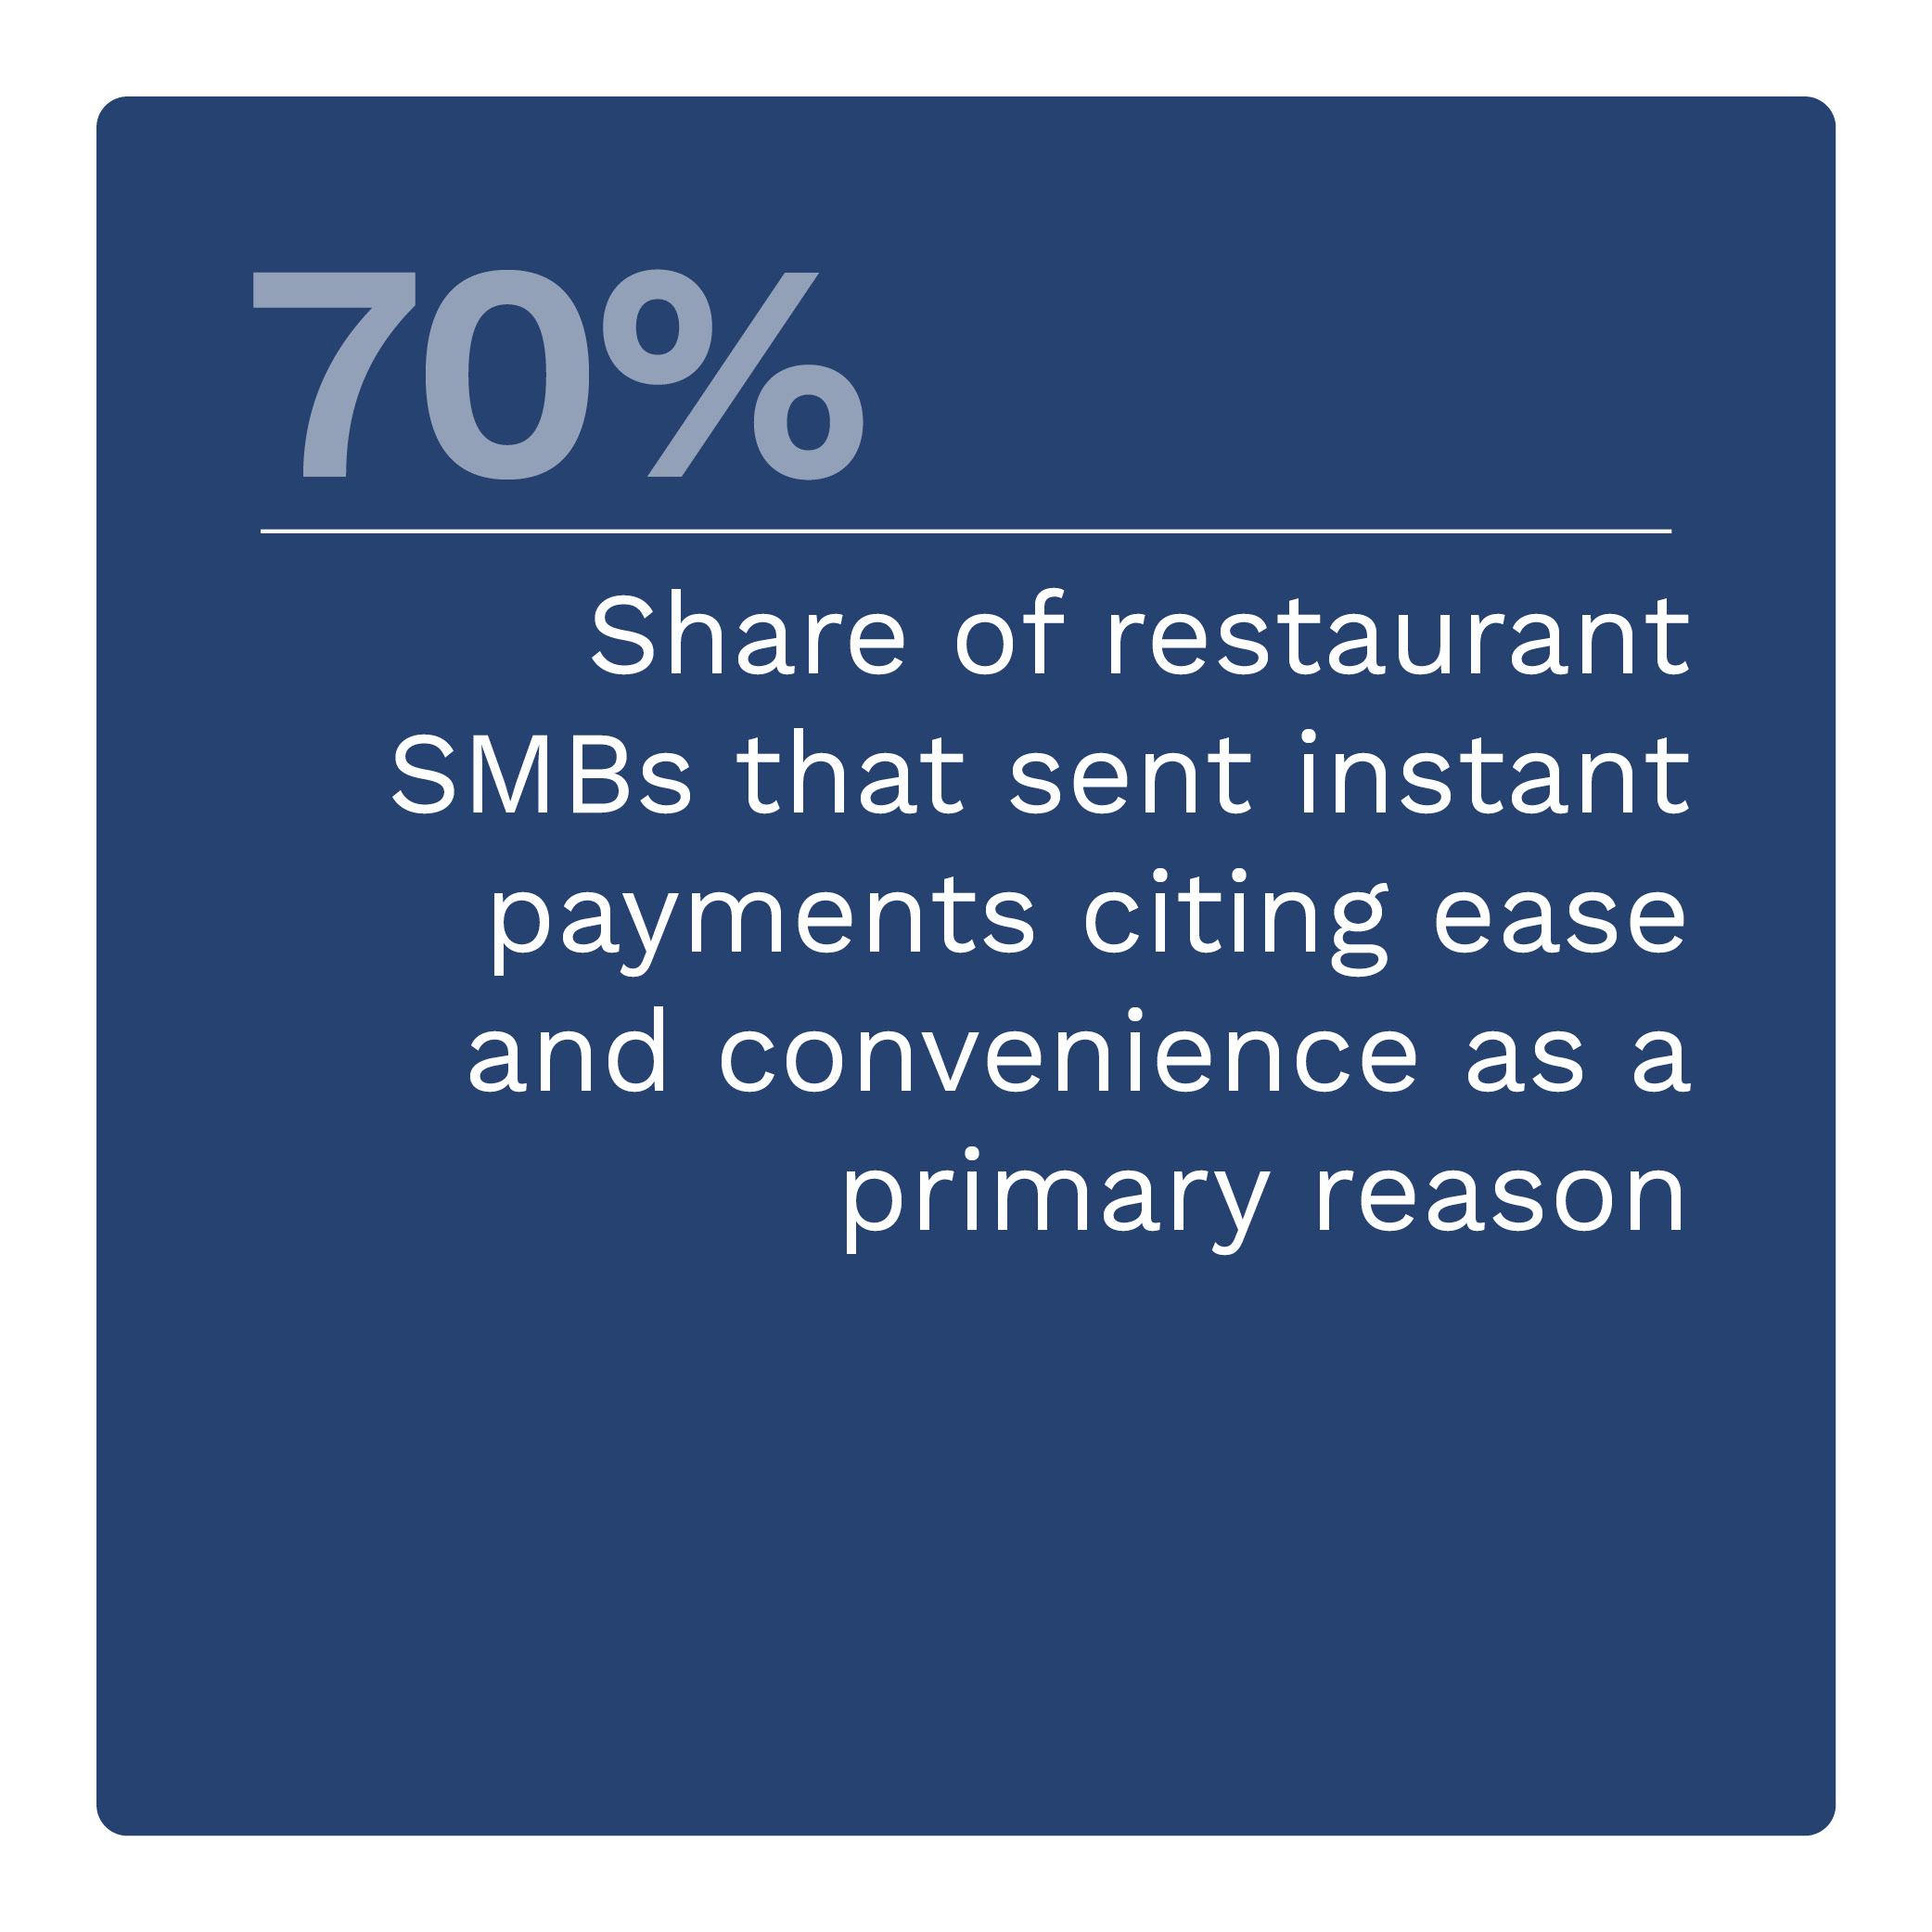 70%: Share of restaurant SMBs that sent instant payments citing ease and convenience as a primary reason